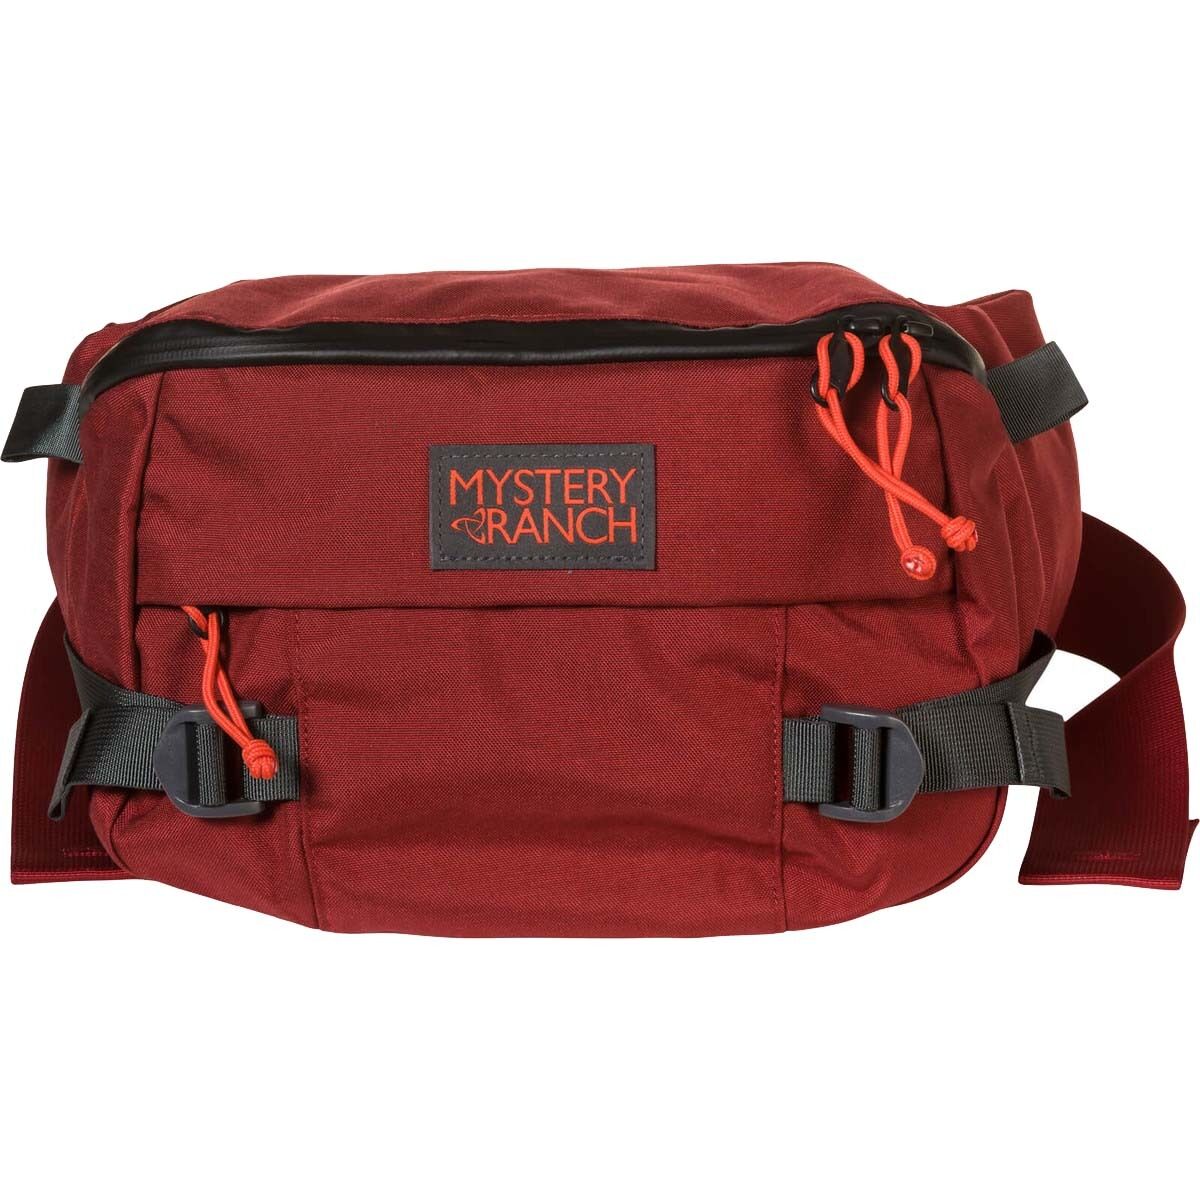 Mystery Ranch Hip Monkey Backpack  5 Star Rating w/ Free Shipping and  Handling